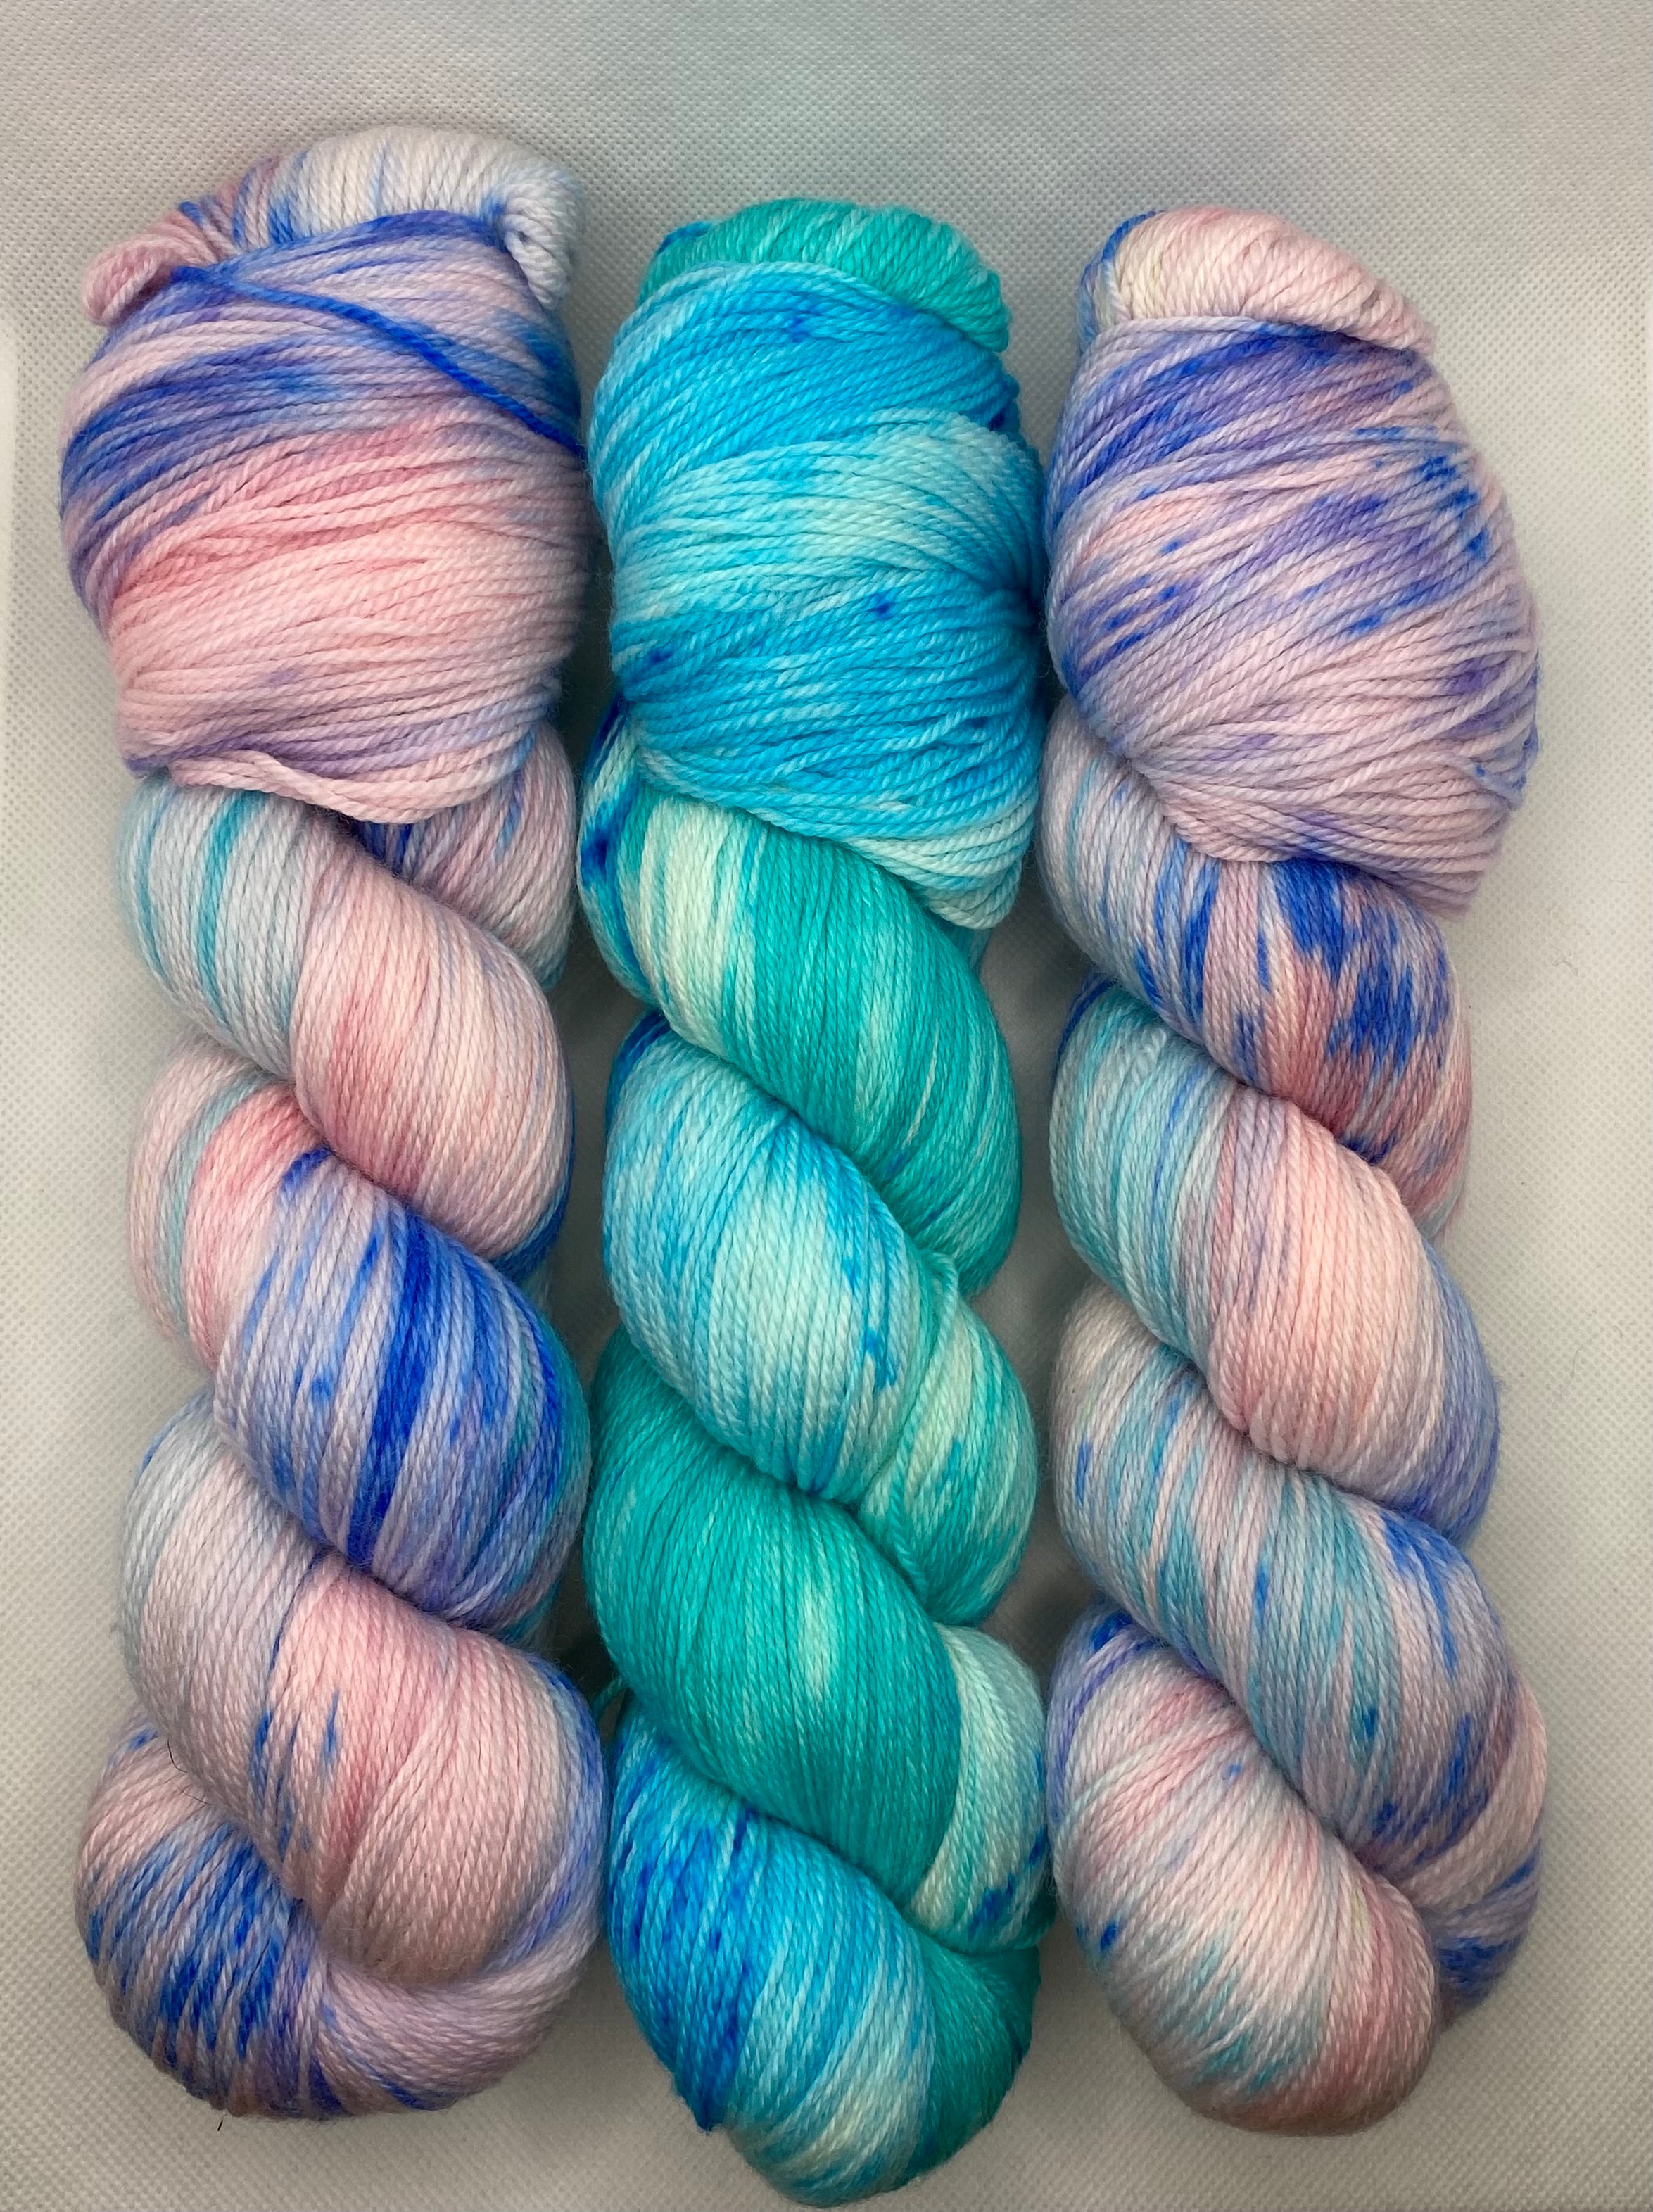 3 Skein Matching Set: Fingering “”Pinks and Blues” 2-ply Hand Dyed Yarn